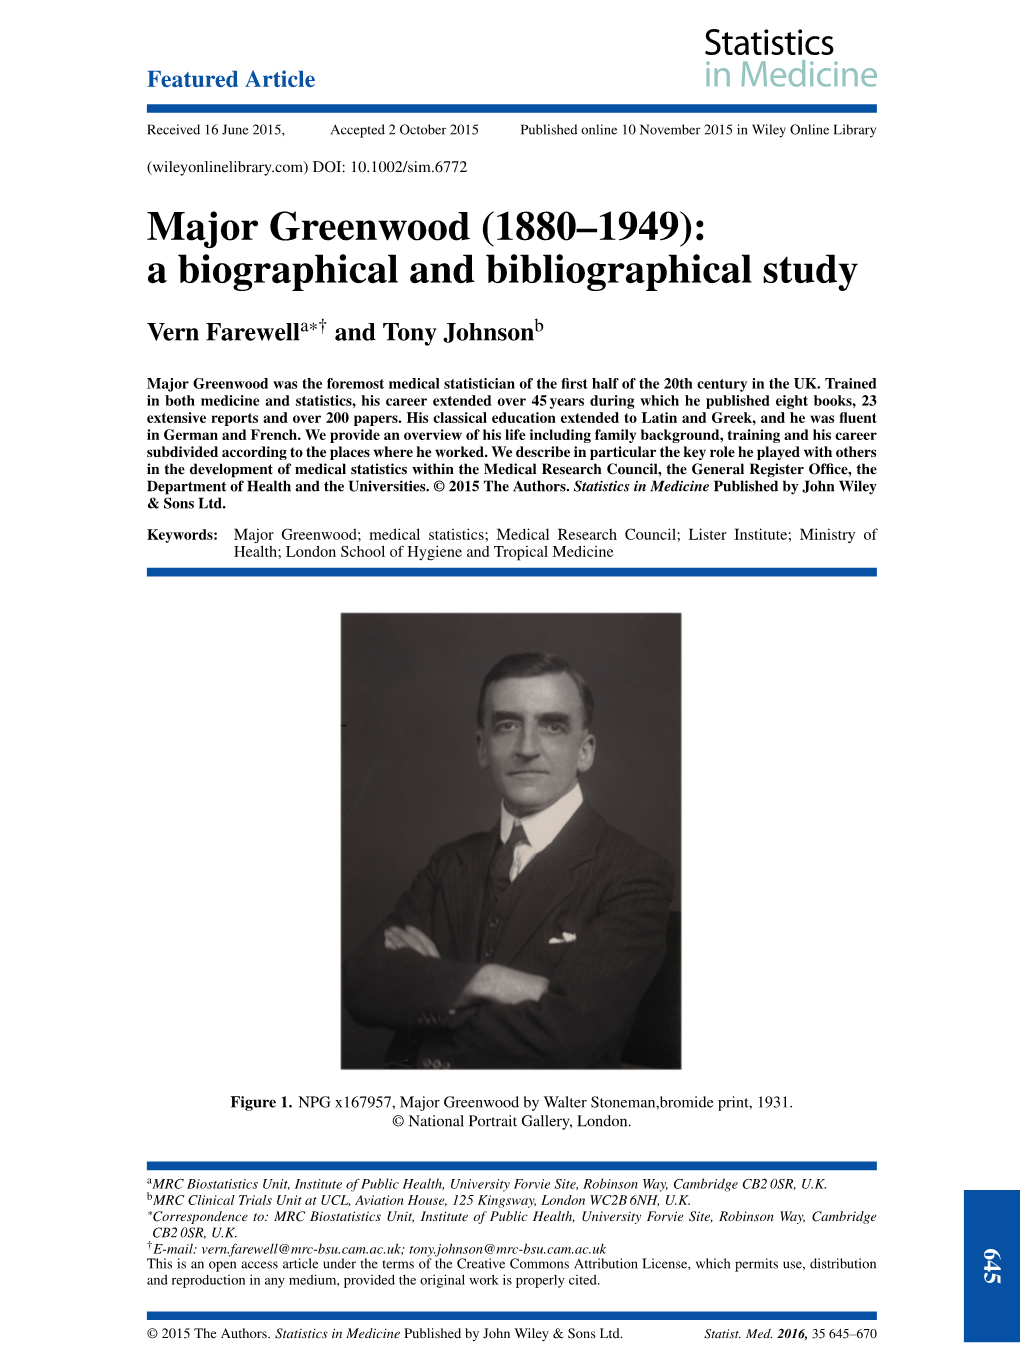 Major Greenwood (1880–1949): a Biographical and Bibliographical Study